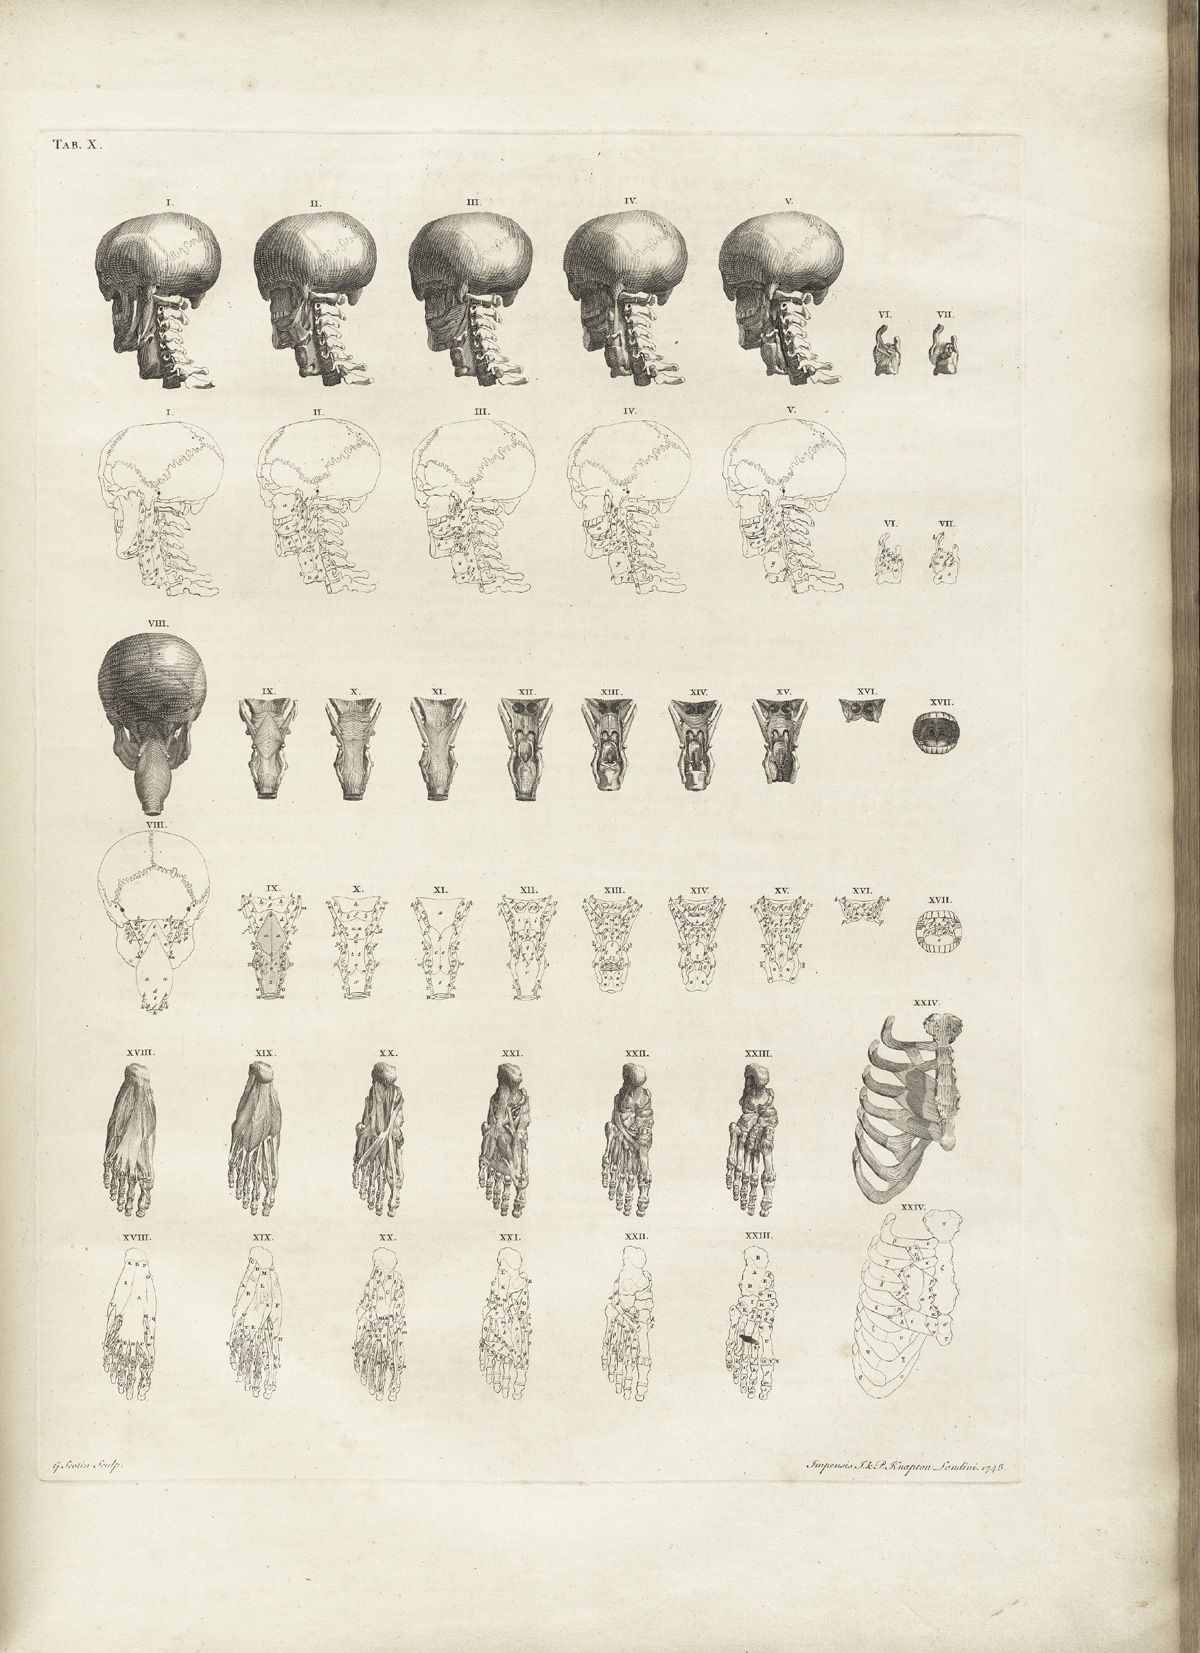 Table 10 of Bernhard Siegfried Albinus' Tabulae sceleti et musculorum corporis humani, featuring detail views of decreasing muscle detail and outlines of the skull, throat, right foot and rib cage.